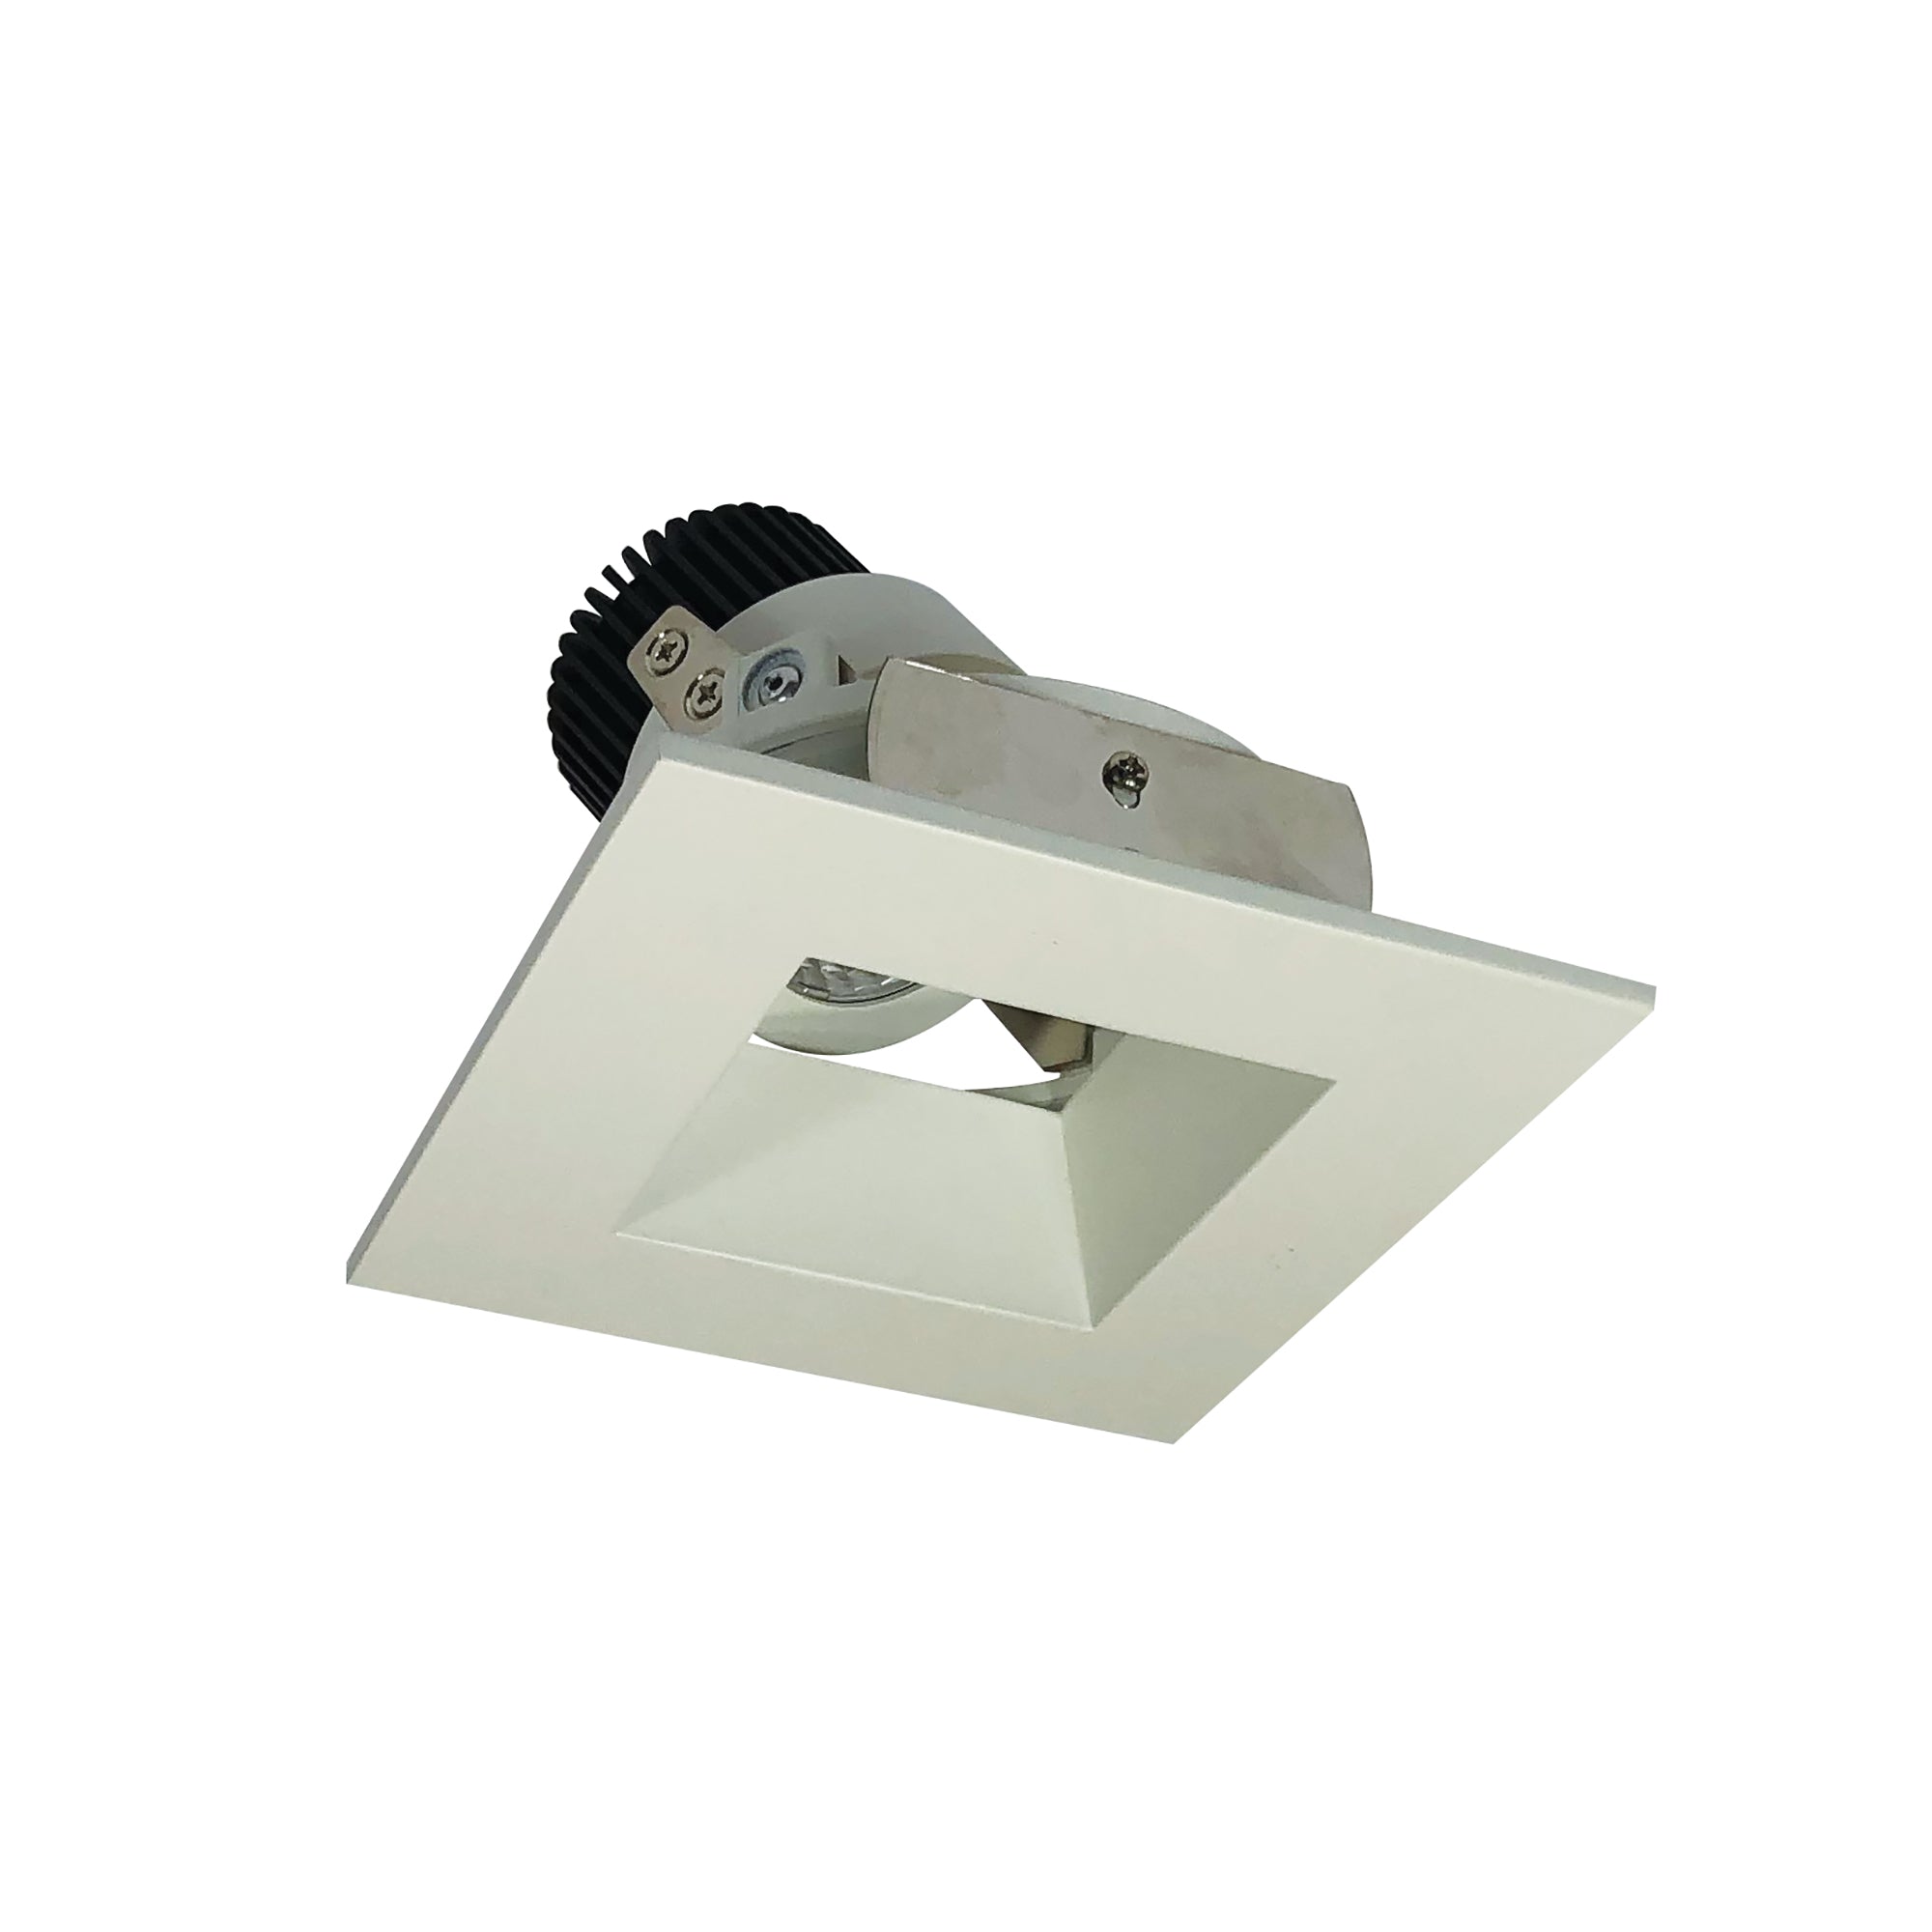 Nora Lighting NIO-4SDSQ40XWW/10 4" Iolite LED Square Adjustable Reflector With Square Aperture, 1000lm / 14W, 4000K - White Reflector / White Flange